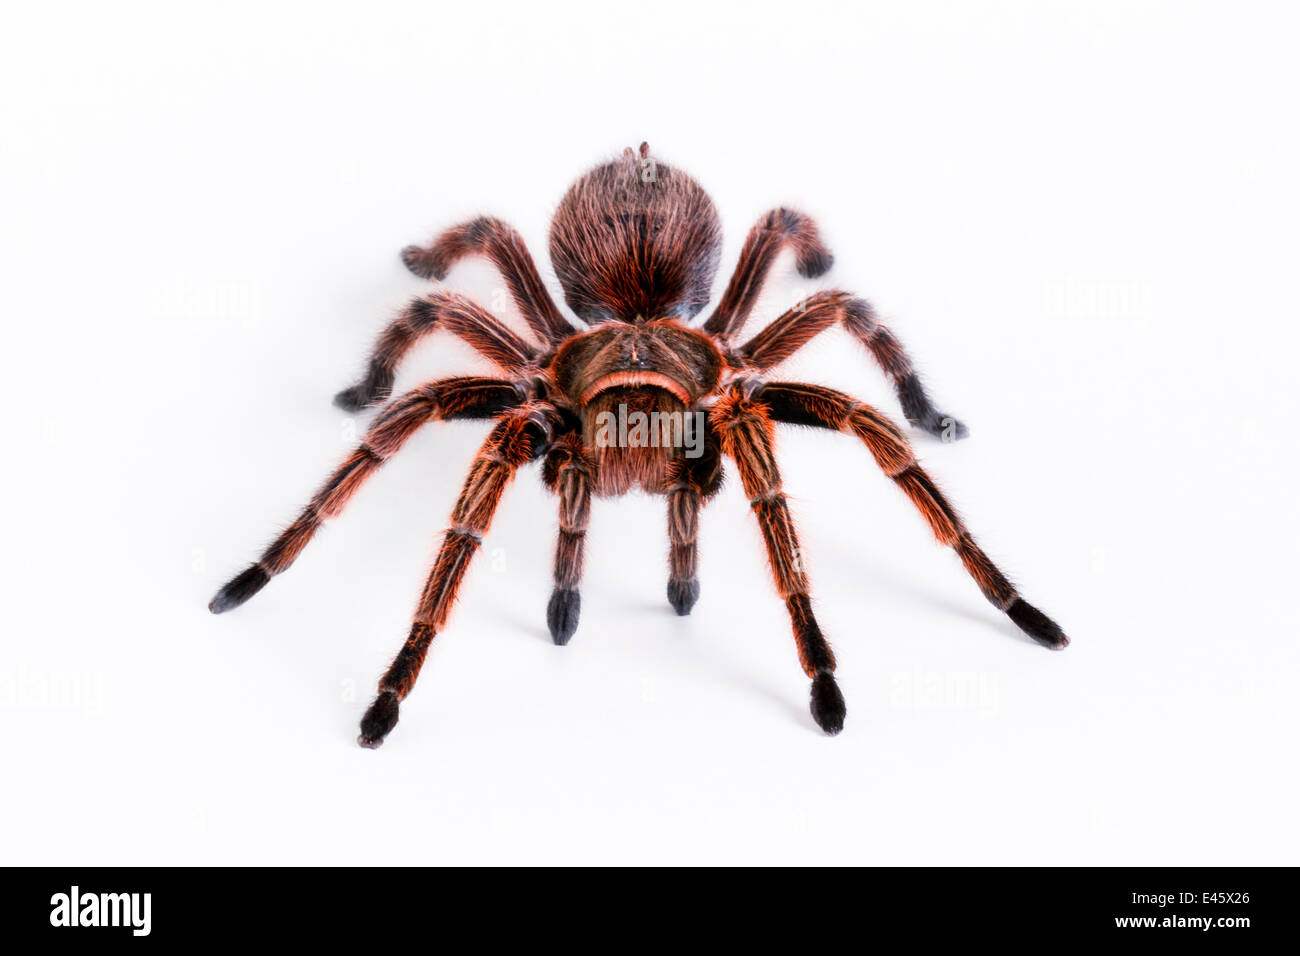 Chilean rose / flame / fire / red-haired tarantula (Grammostola rosea) female, from South America Stock Photo